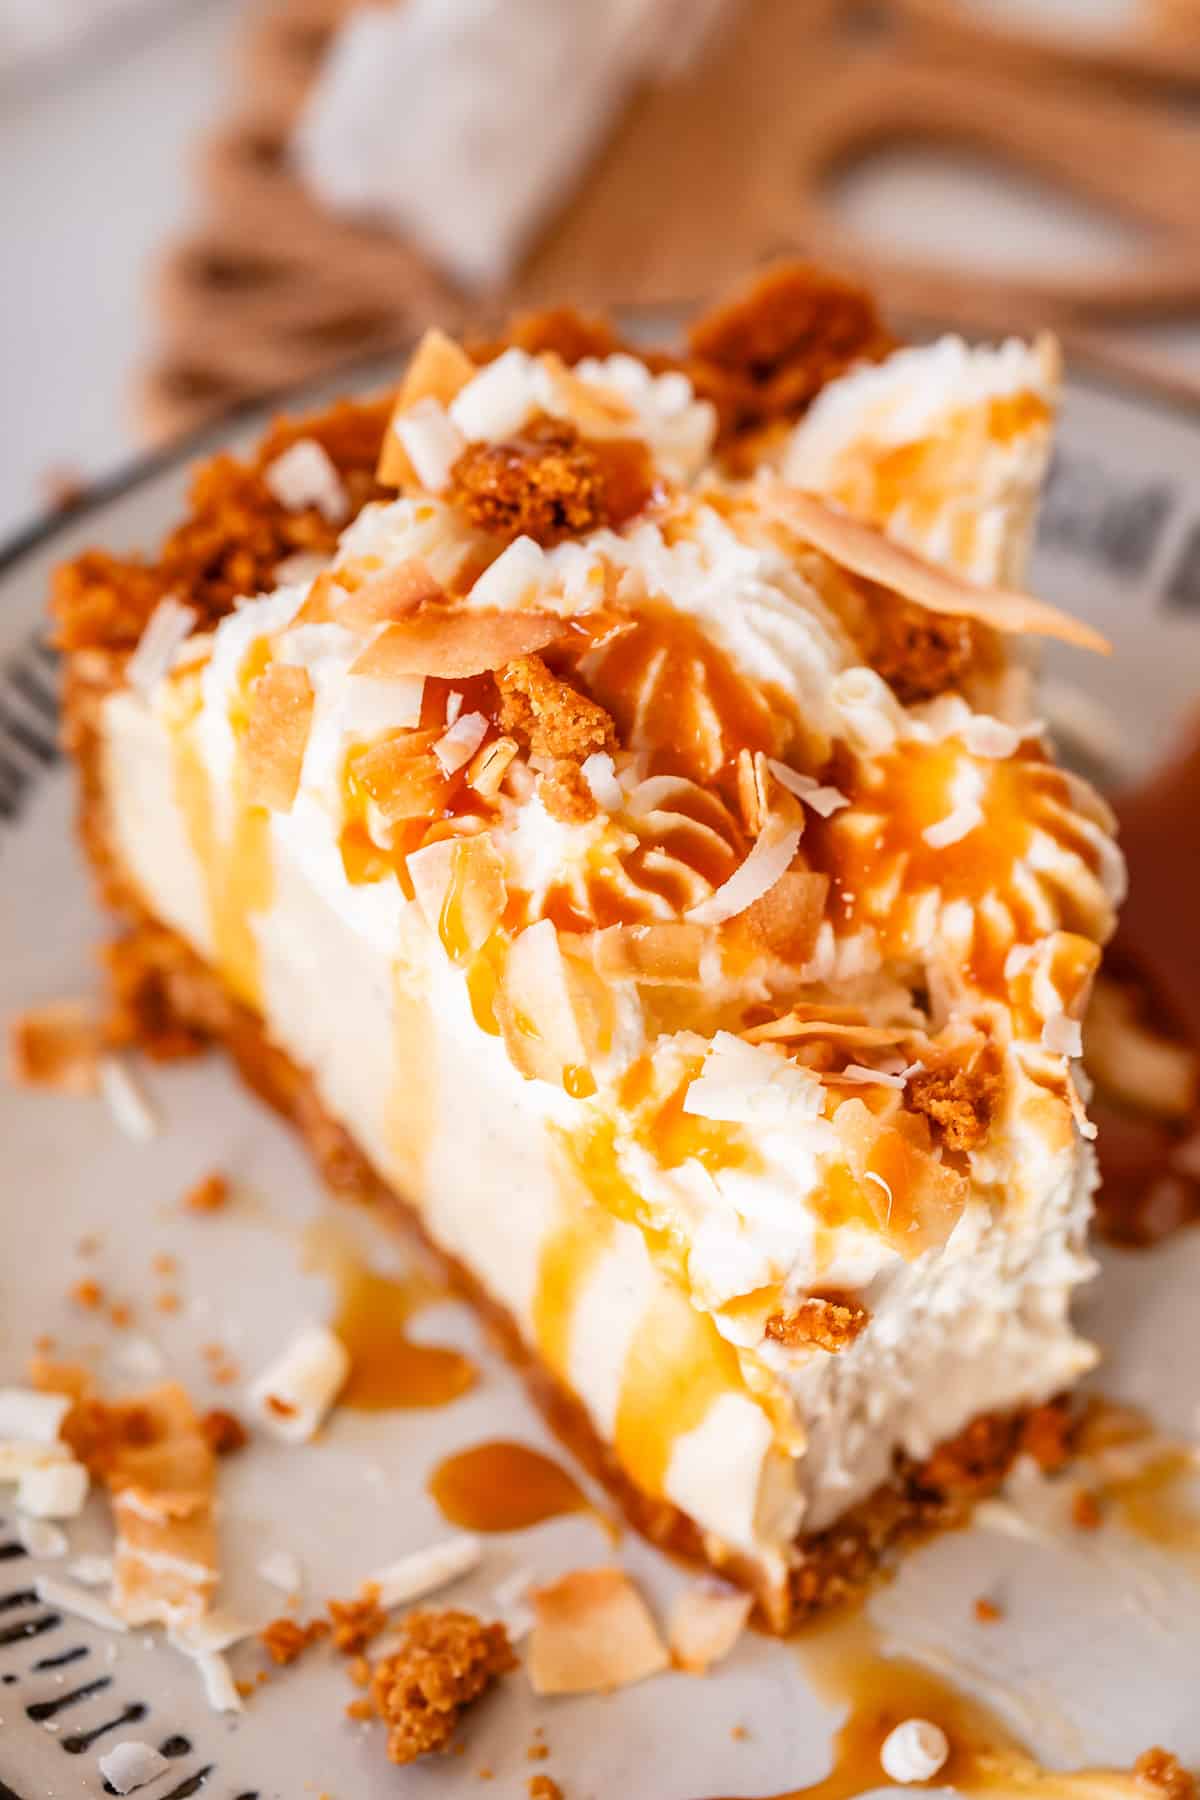 slice of coconut cream pie with white chocolate garnish and caramel drizzle.